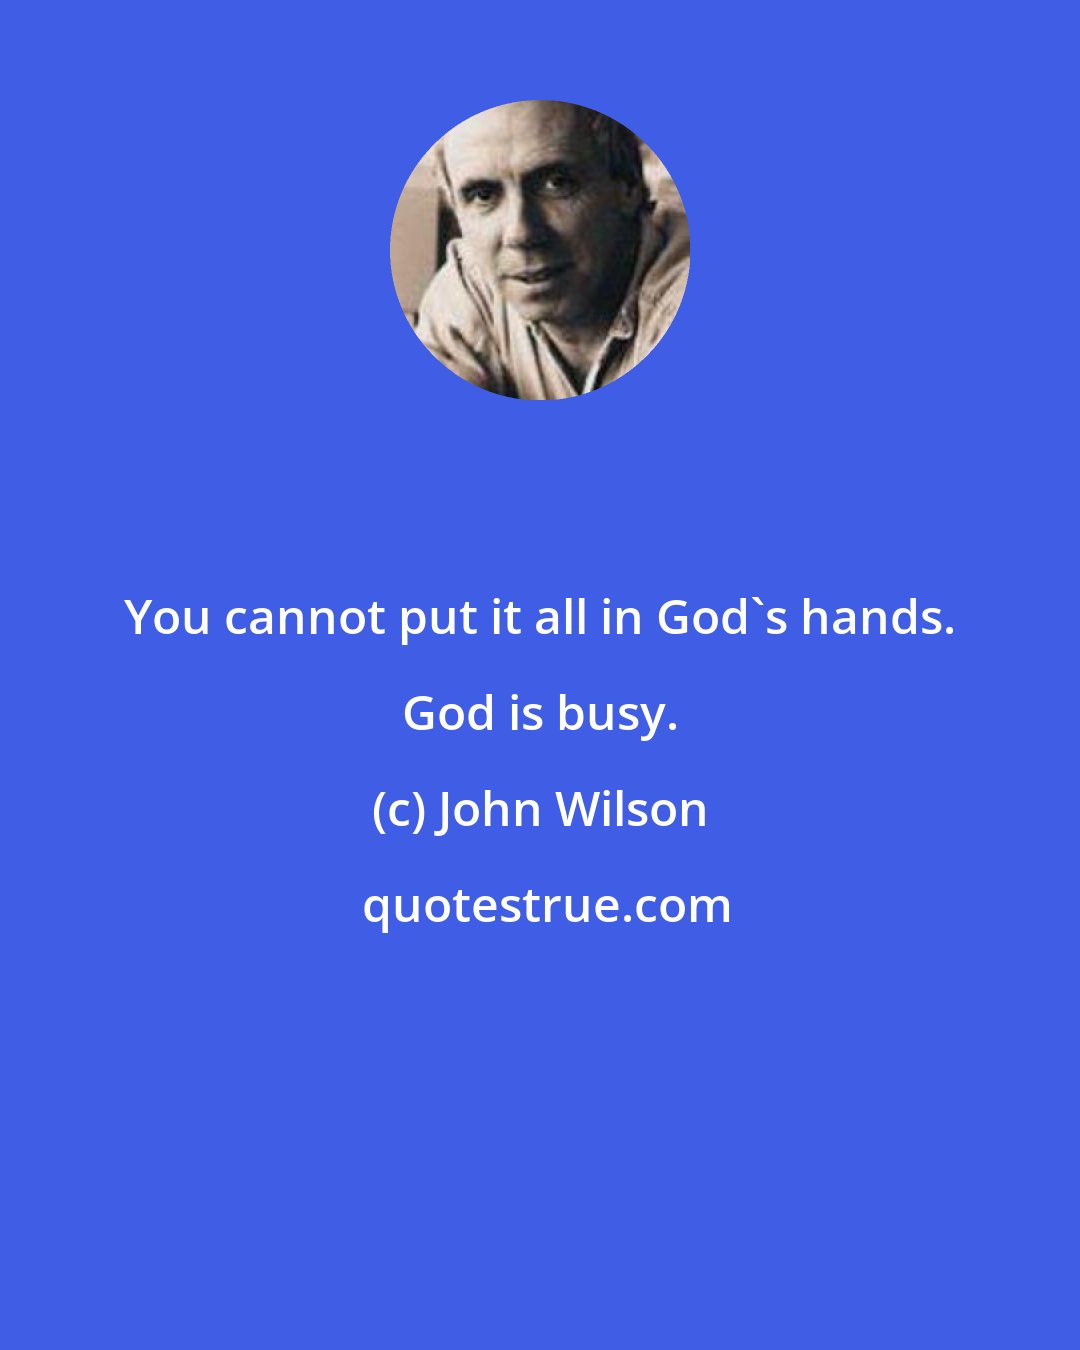 John Wilson: You cannot put it all in God's hands. God is busy.